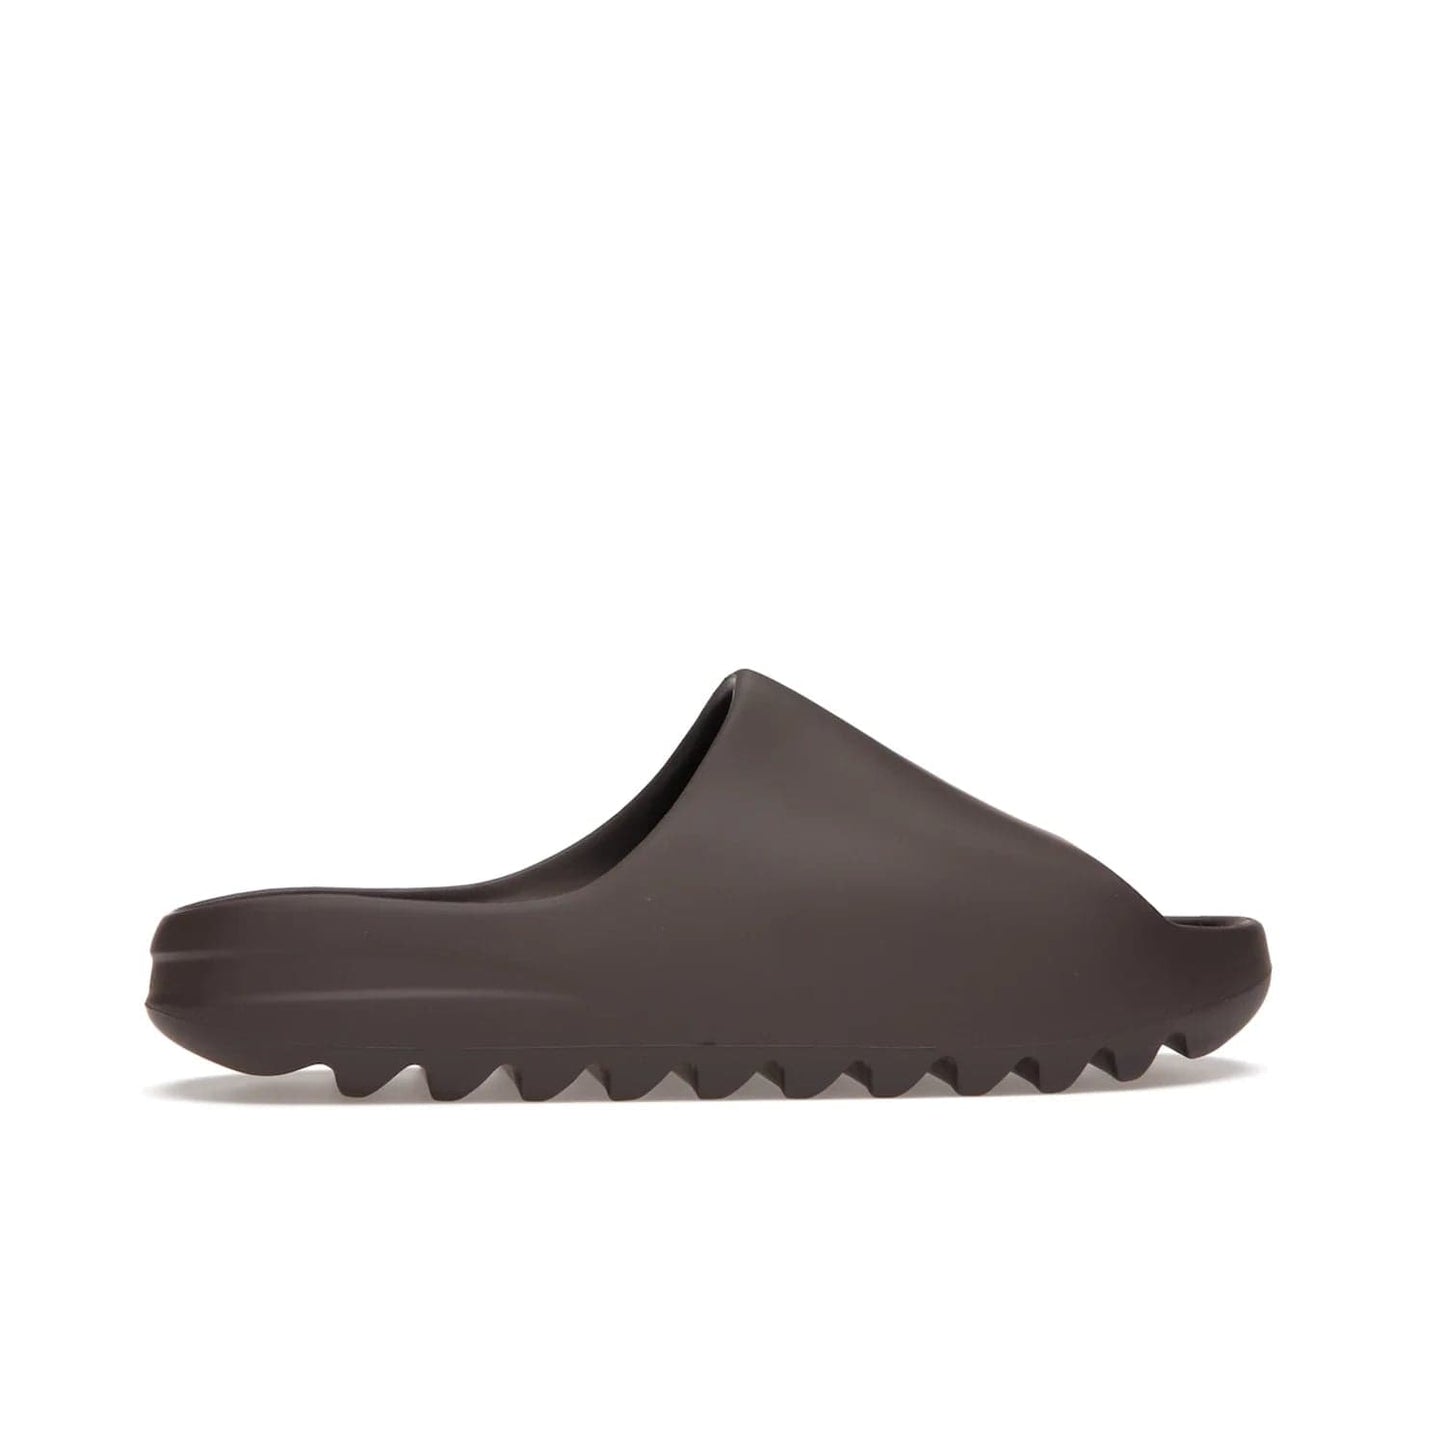 adidas Yeezy Slide Soot - Image 36 - Only at www.BallersClubKickz.com - Shop the Yeezy Slide Soot sneaker by Adidas, a sleek blend of form and function. Monochrome silhouette in Soot/Soot/Soot. Lightweight EVA foam offers comfort and durability. Get the must-have style today.